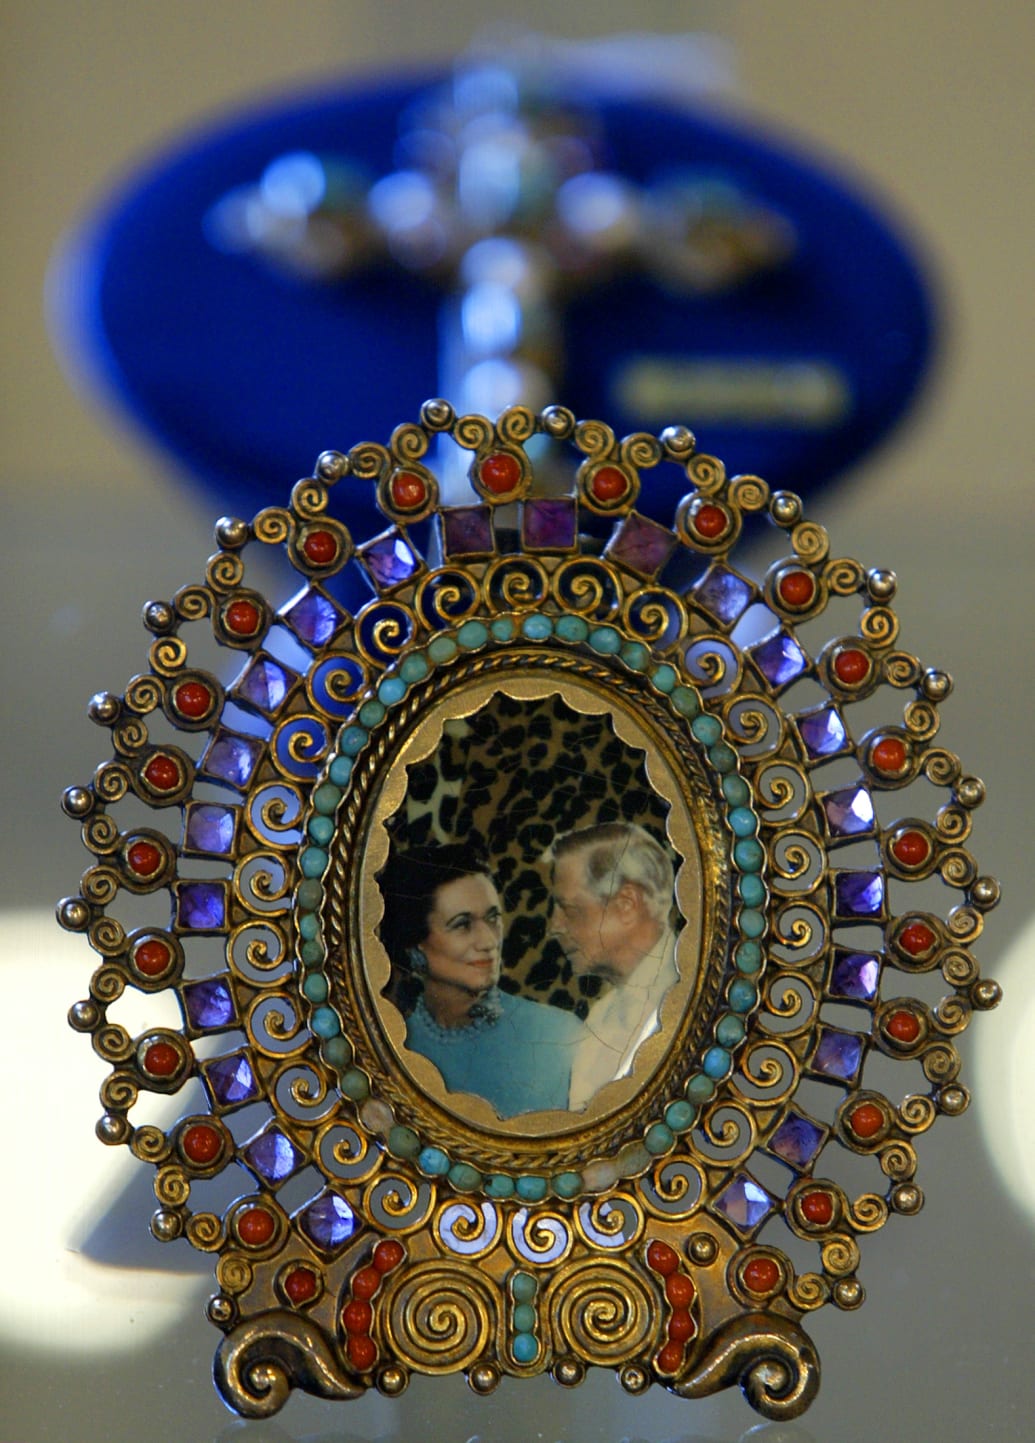 A cameo depicting Edward VIII with Wallis Simpson, the American divorcee woman for who Edward VIII abdicated from the British throne, is seen at Christies auction house in Rome June 16, 2004.